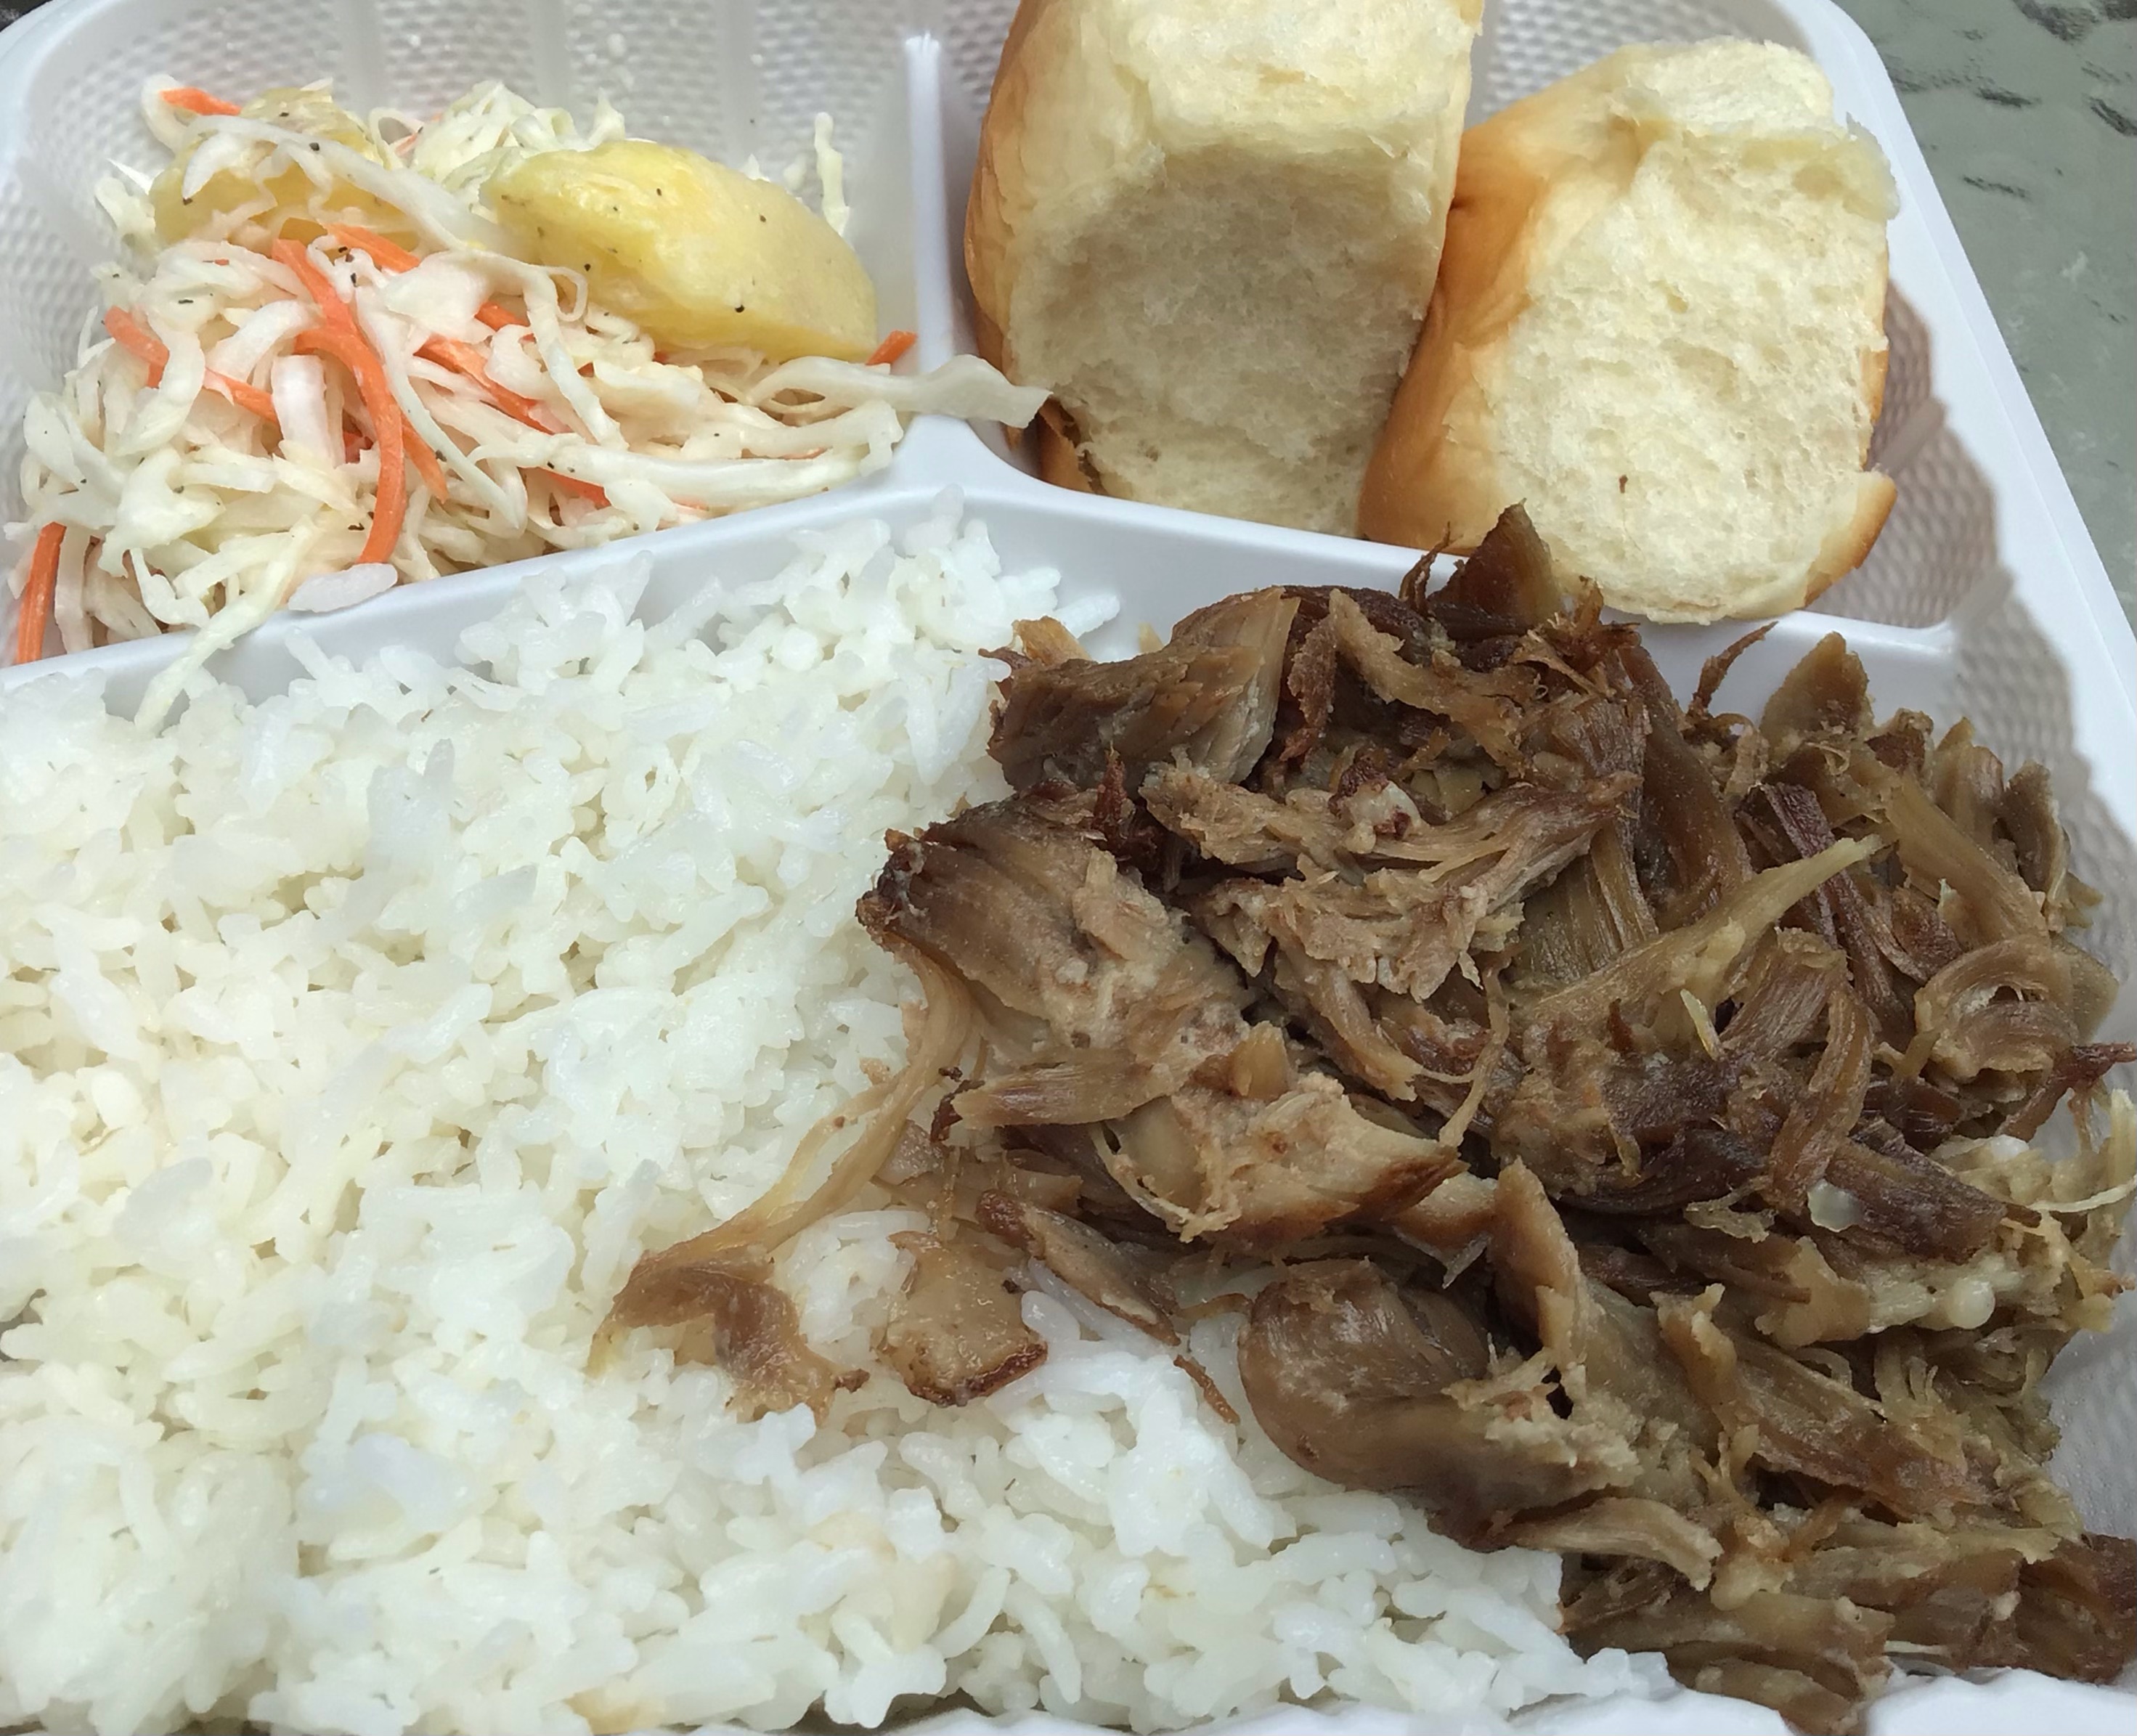 A white plastic to-go tray features a bed of steamed white rice in the main dish compartment, with a pile of slow-cooked, shredded pork set off to the right. The side dish compartments contain, on the left, a serving of pineapple coleslaw (shredded cabbage and carrots are visible, as is a large chunk of pineapple) and, on the right, two Hawaiian rolls. Photo by Rachael McMillan.